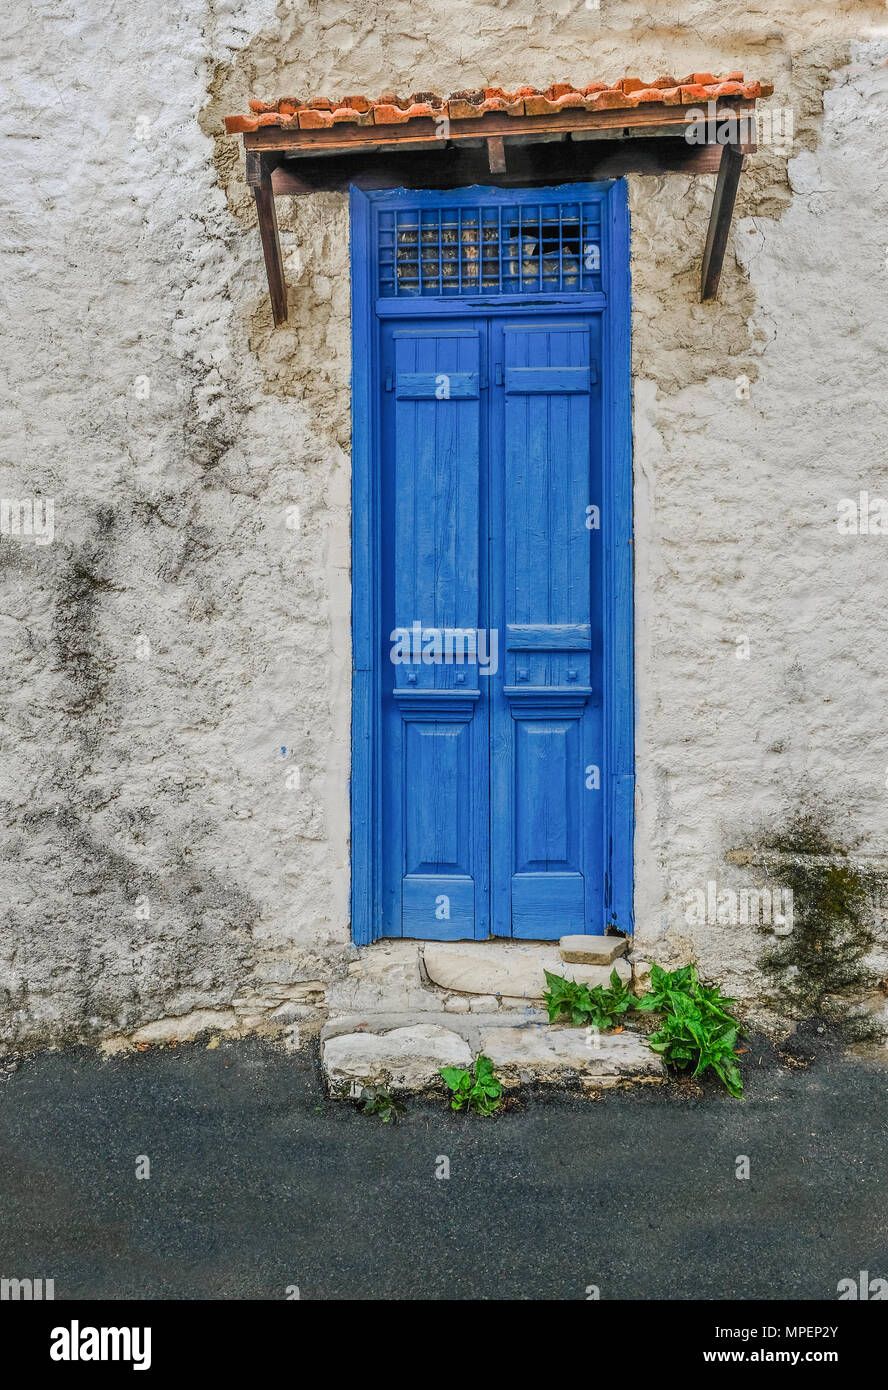 Old building with interesting blue wooden doors that are closed.  Vibrant blue in colour and a grill pattern at the top, covered by a tiny tiled roof. Stock Photo